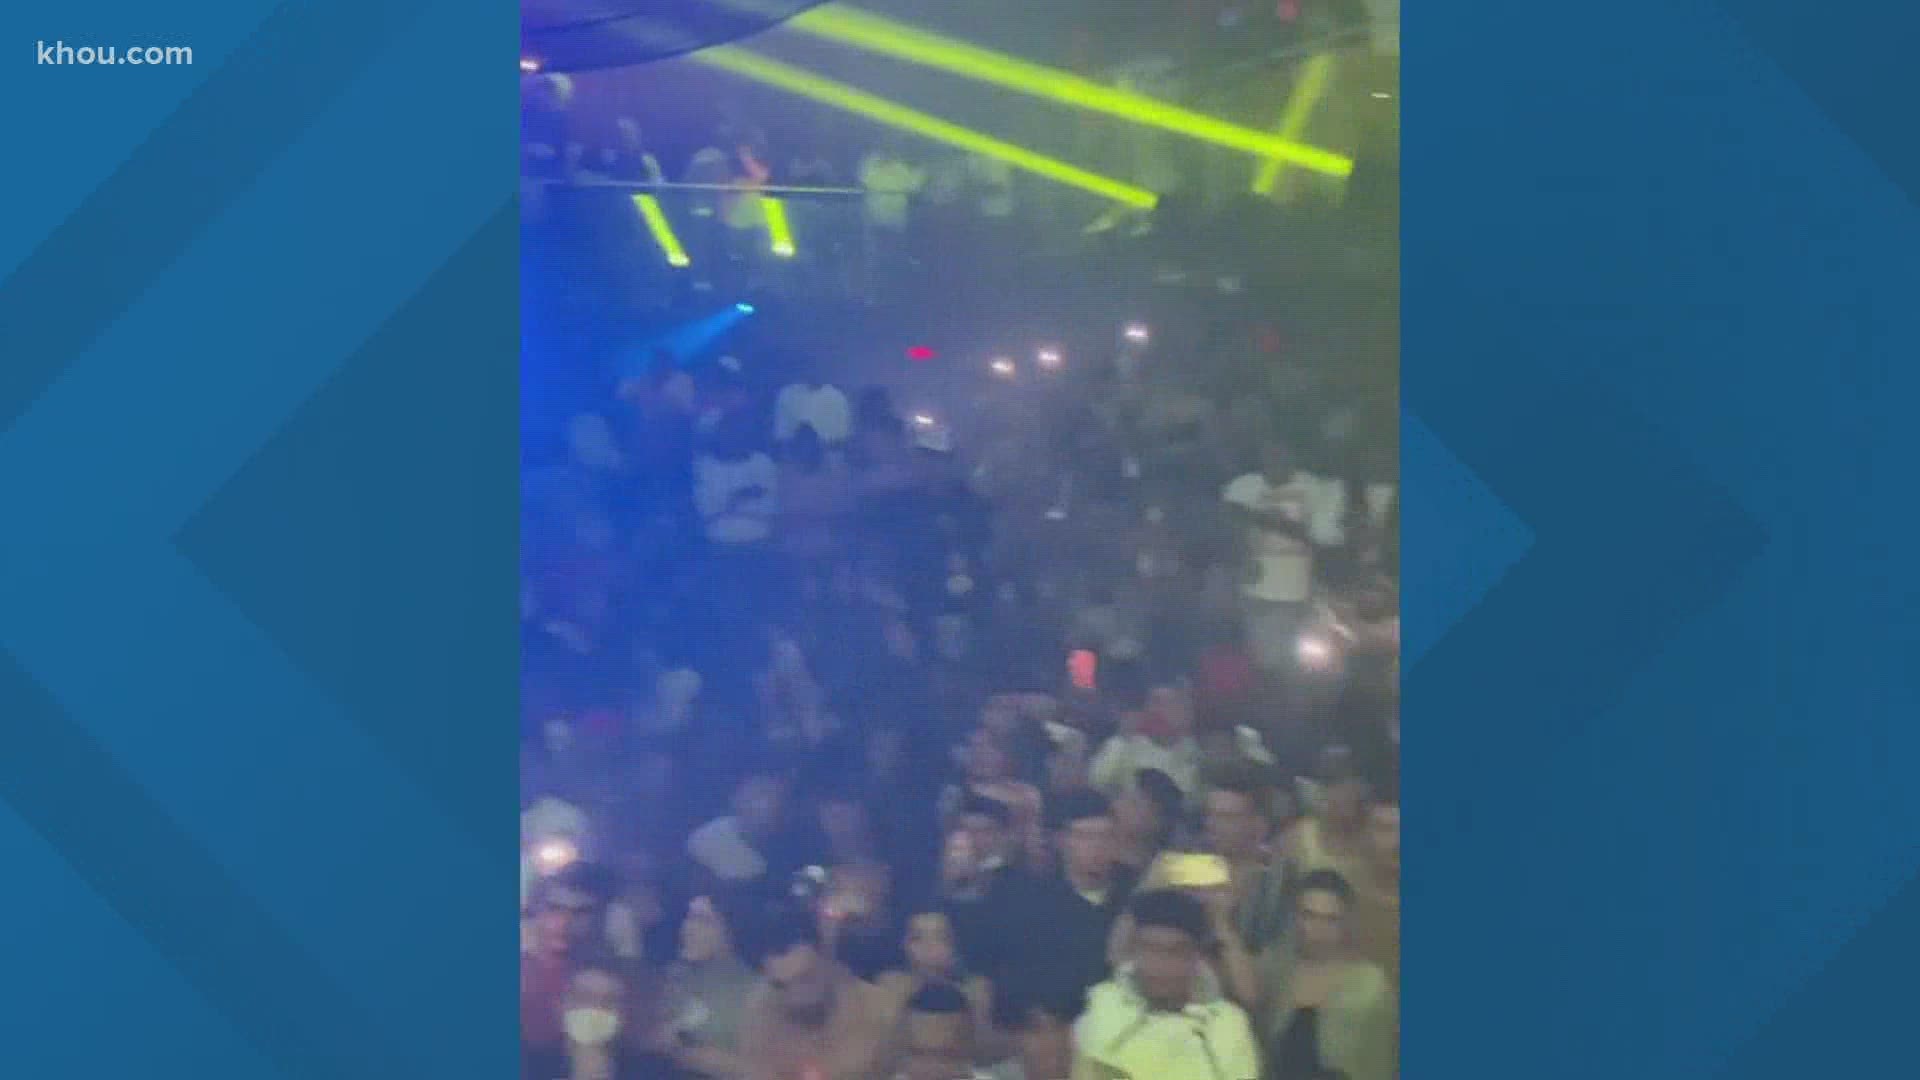 Mayor Turner responds to viral video of maskless crowd at club 